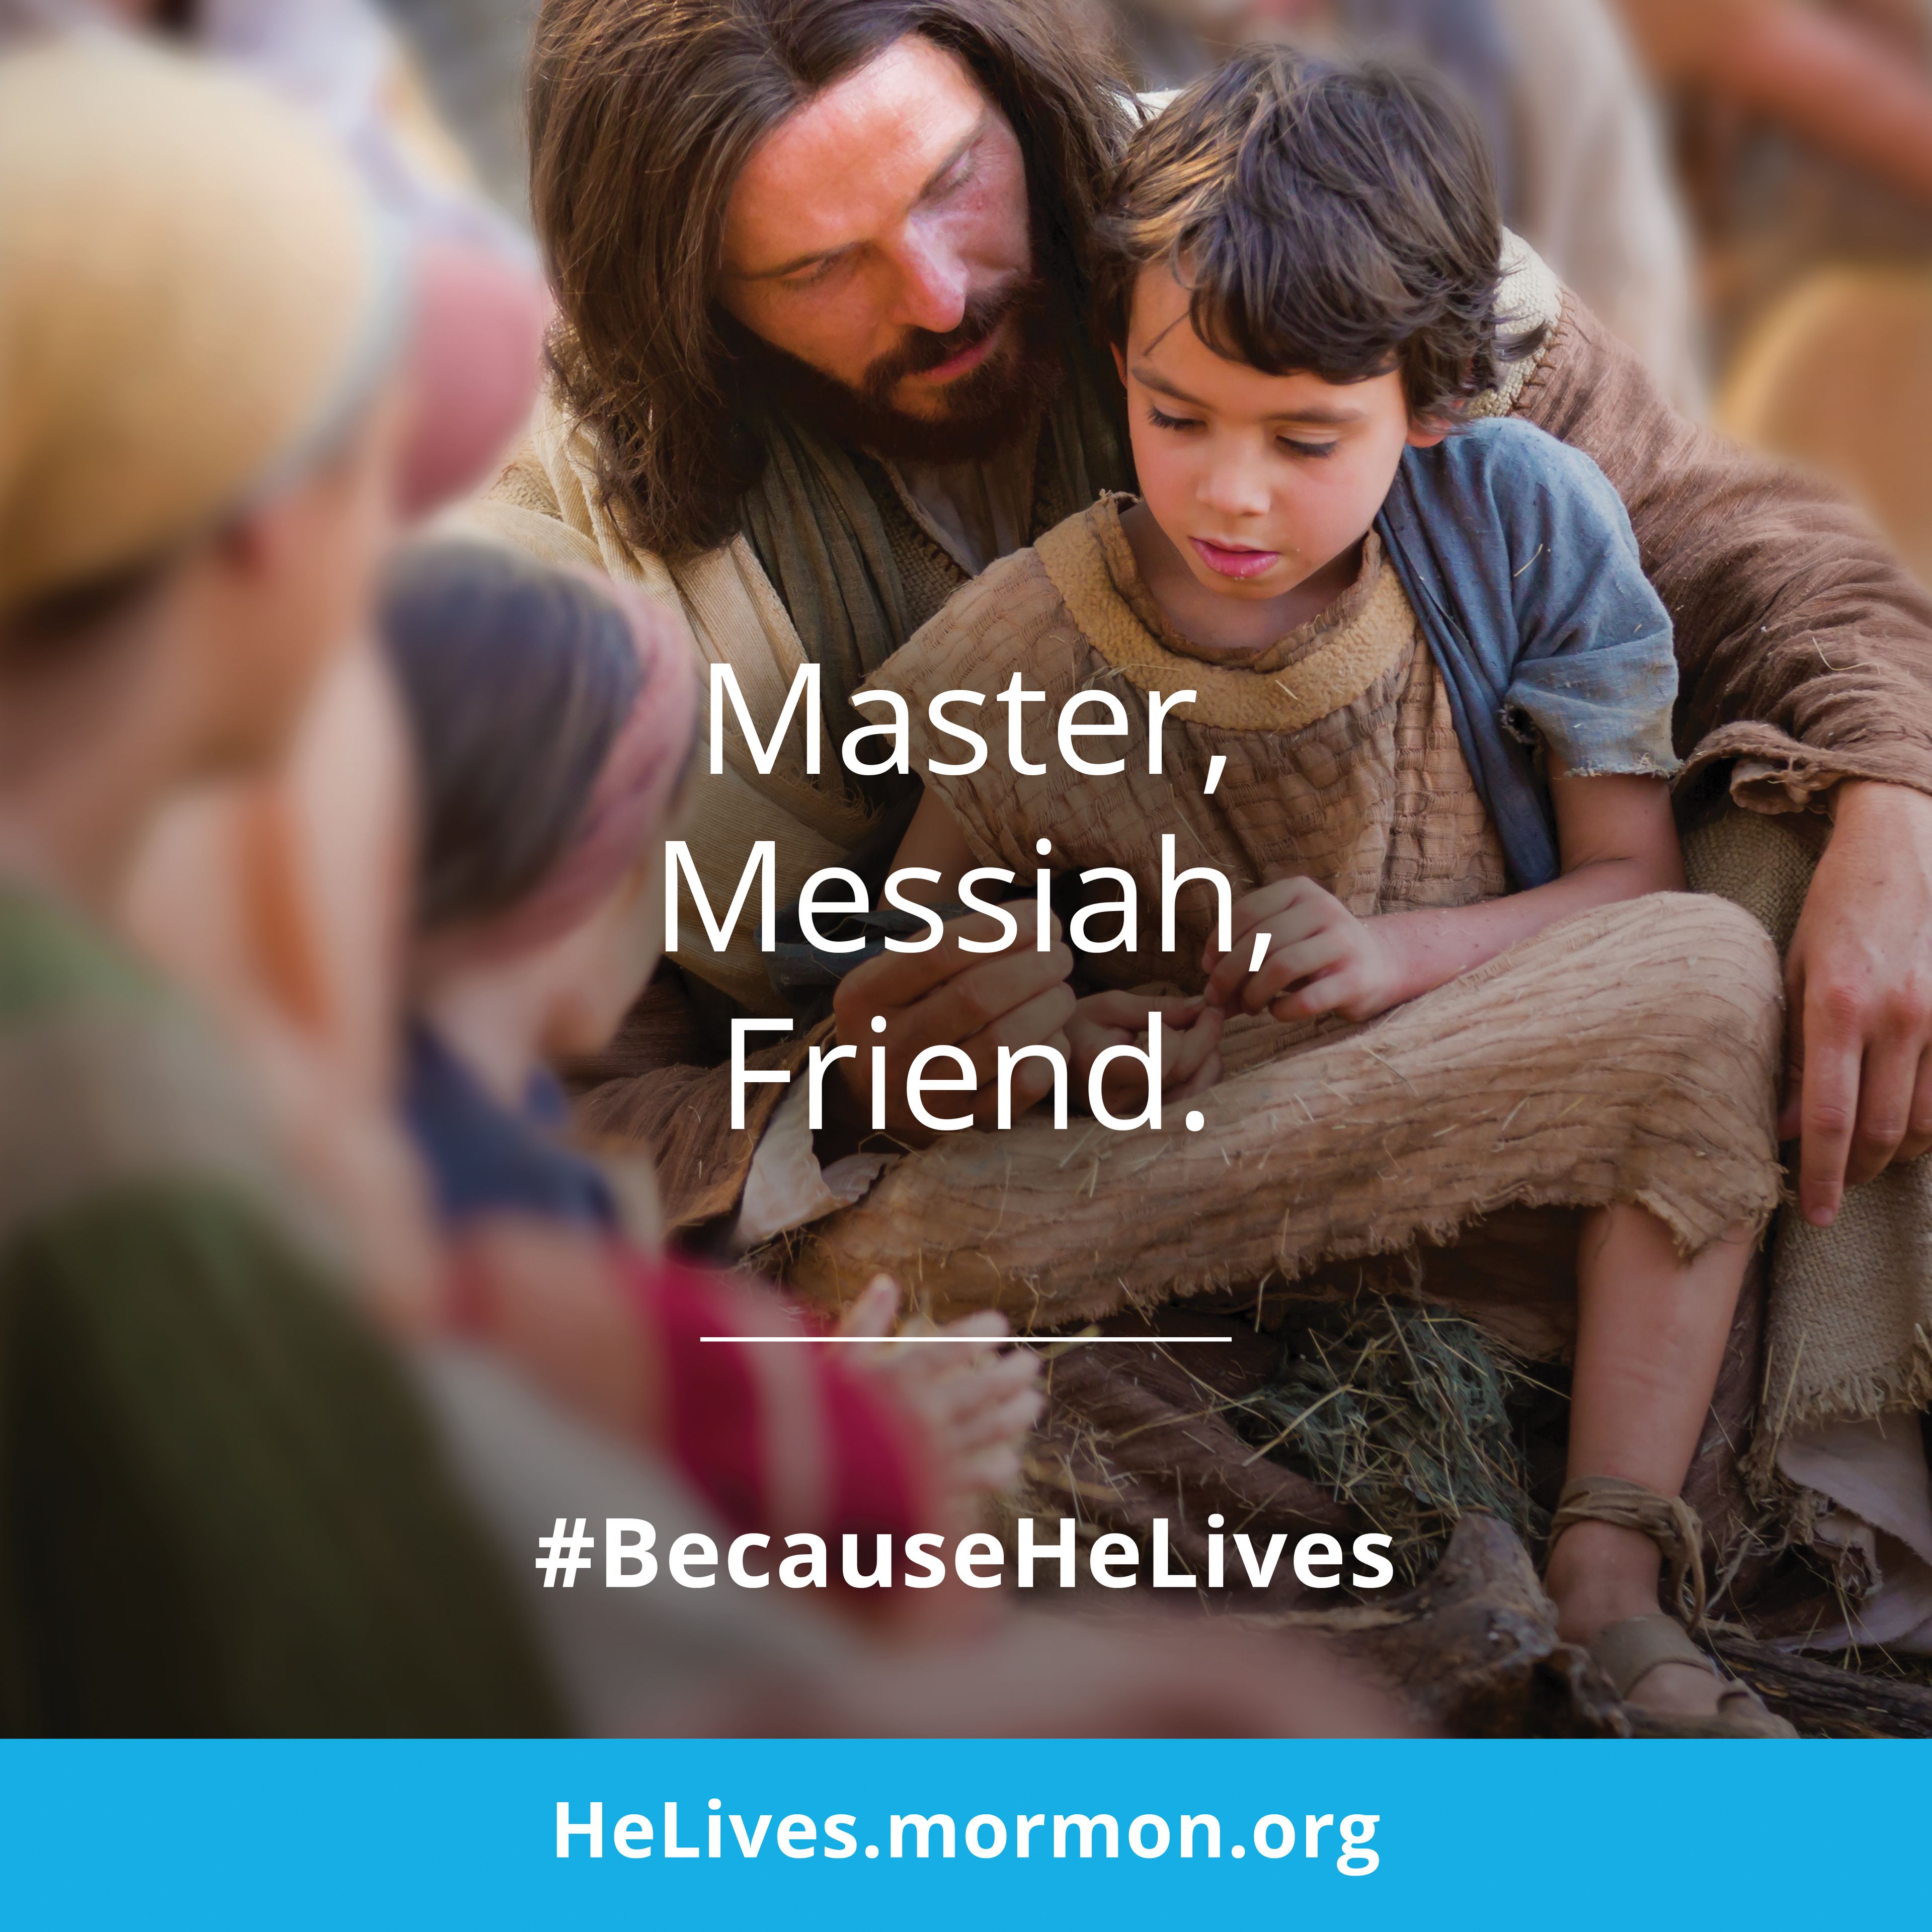 Master, Messiah, Friend. #BecauseHeLives, HeLives.mormon.org